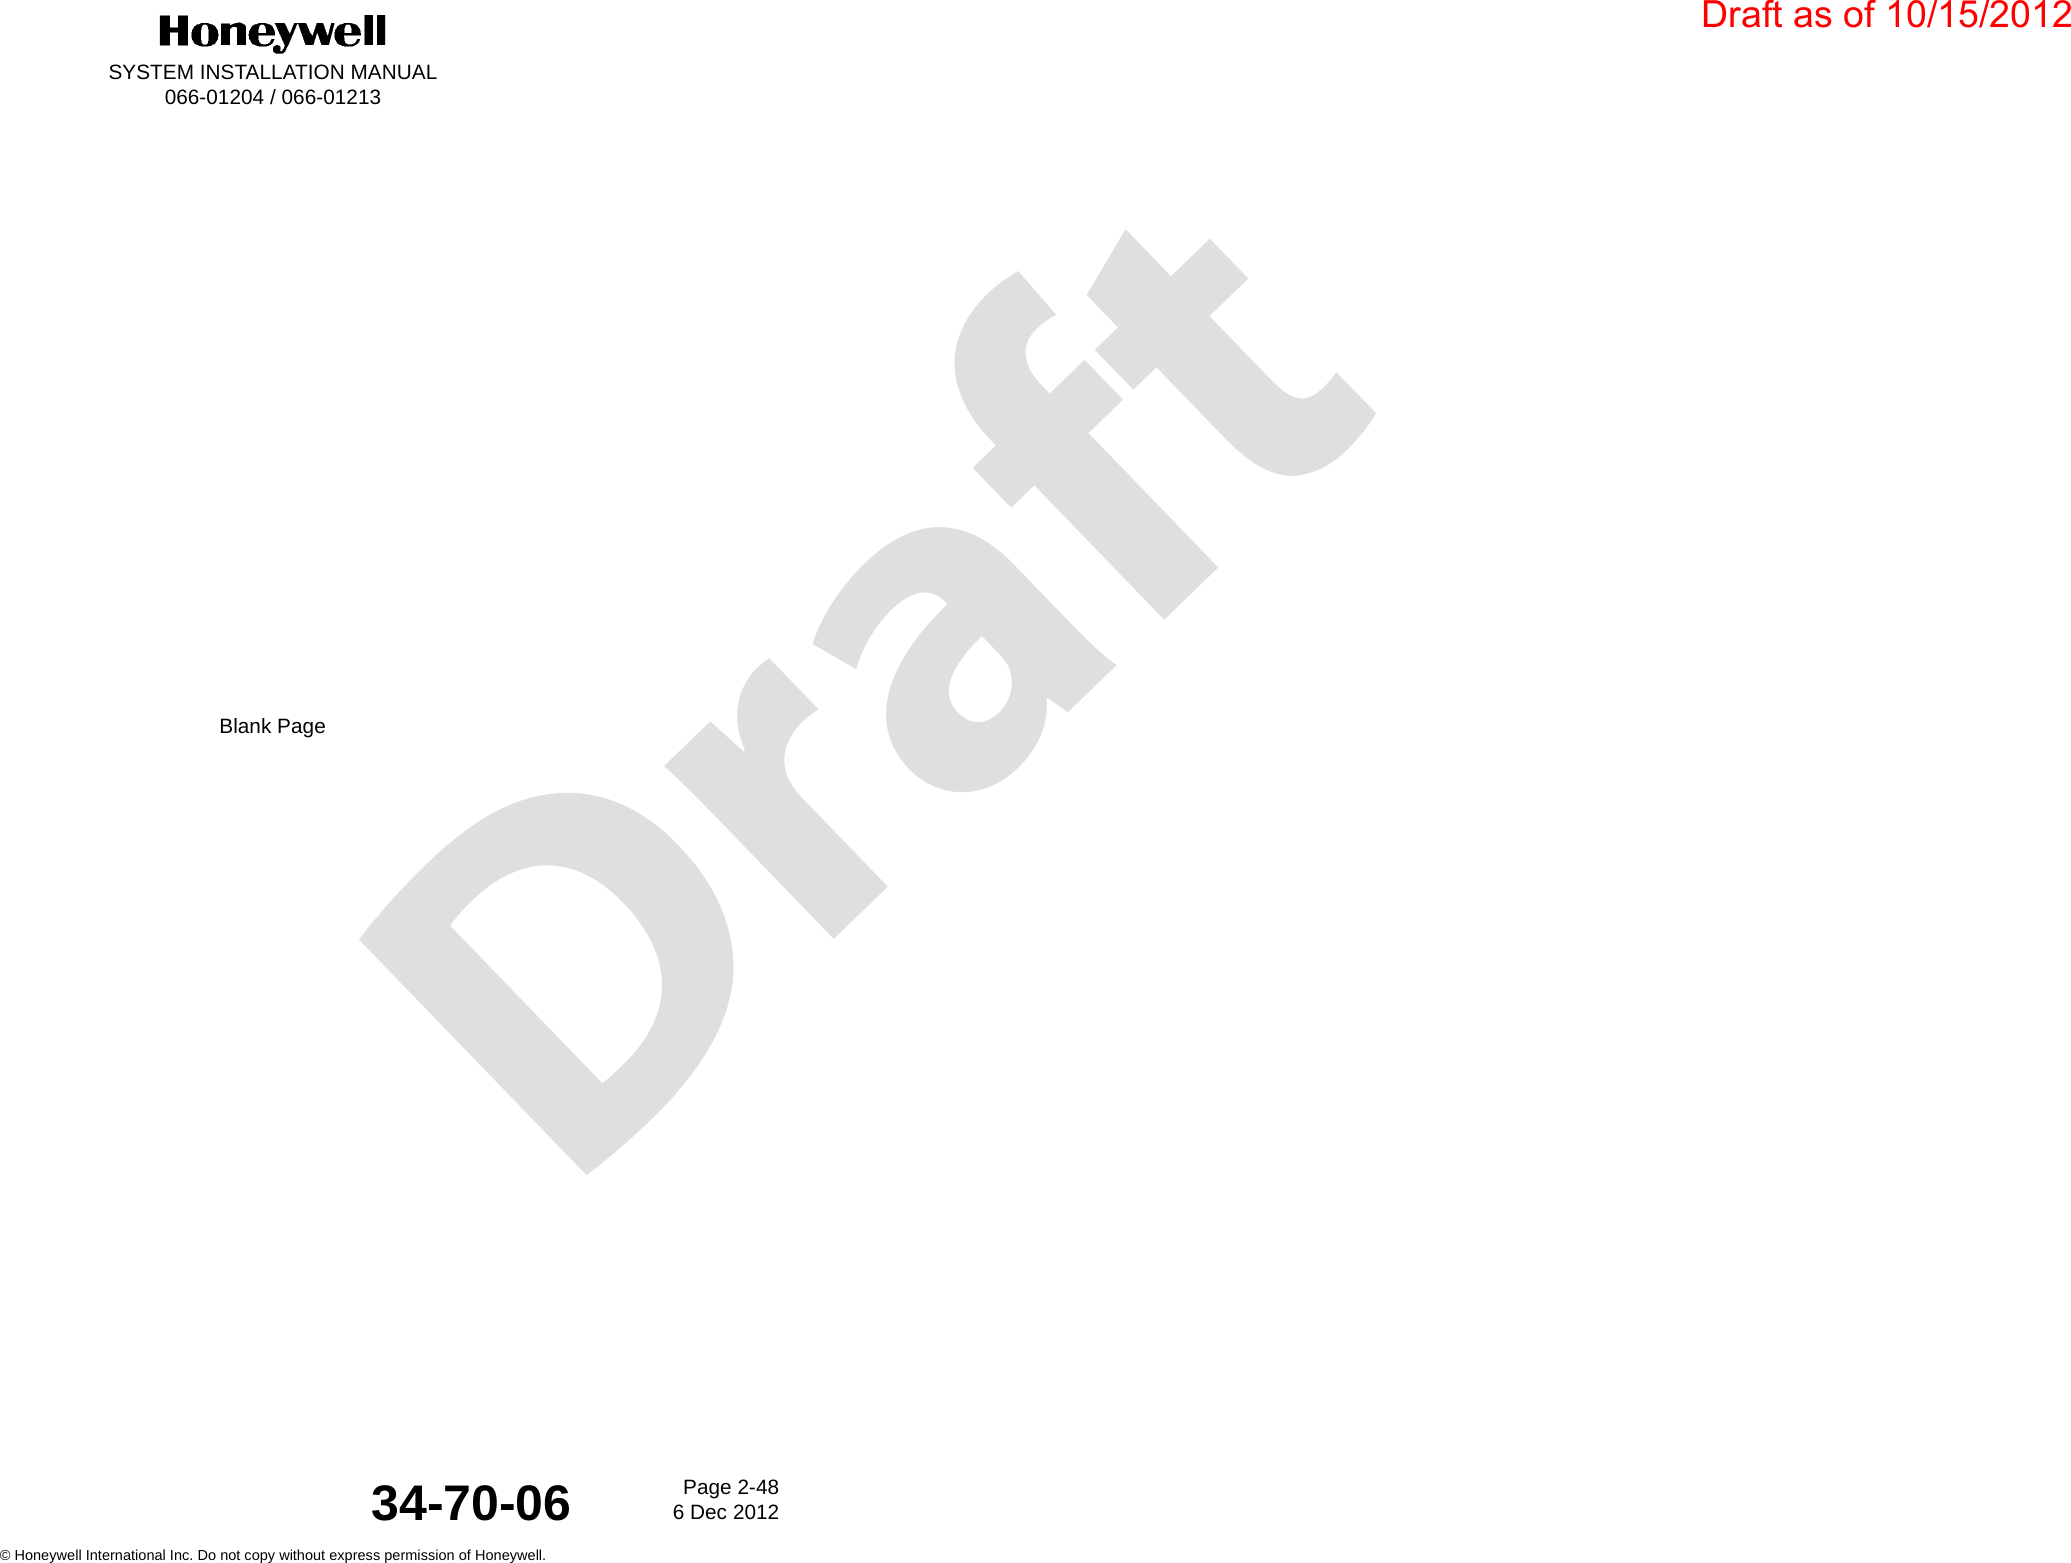 DraftSYSTEM INSTALLATION MANUAL066-01204 / 066-01213Page 2-486 Dec 2012© Honeywell International Inc. Do not copy without express permission of Honeywell.34-70-06Blank PageDraft as of 10/15/2012